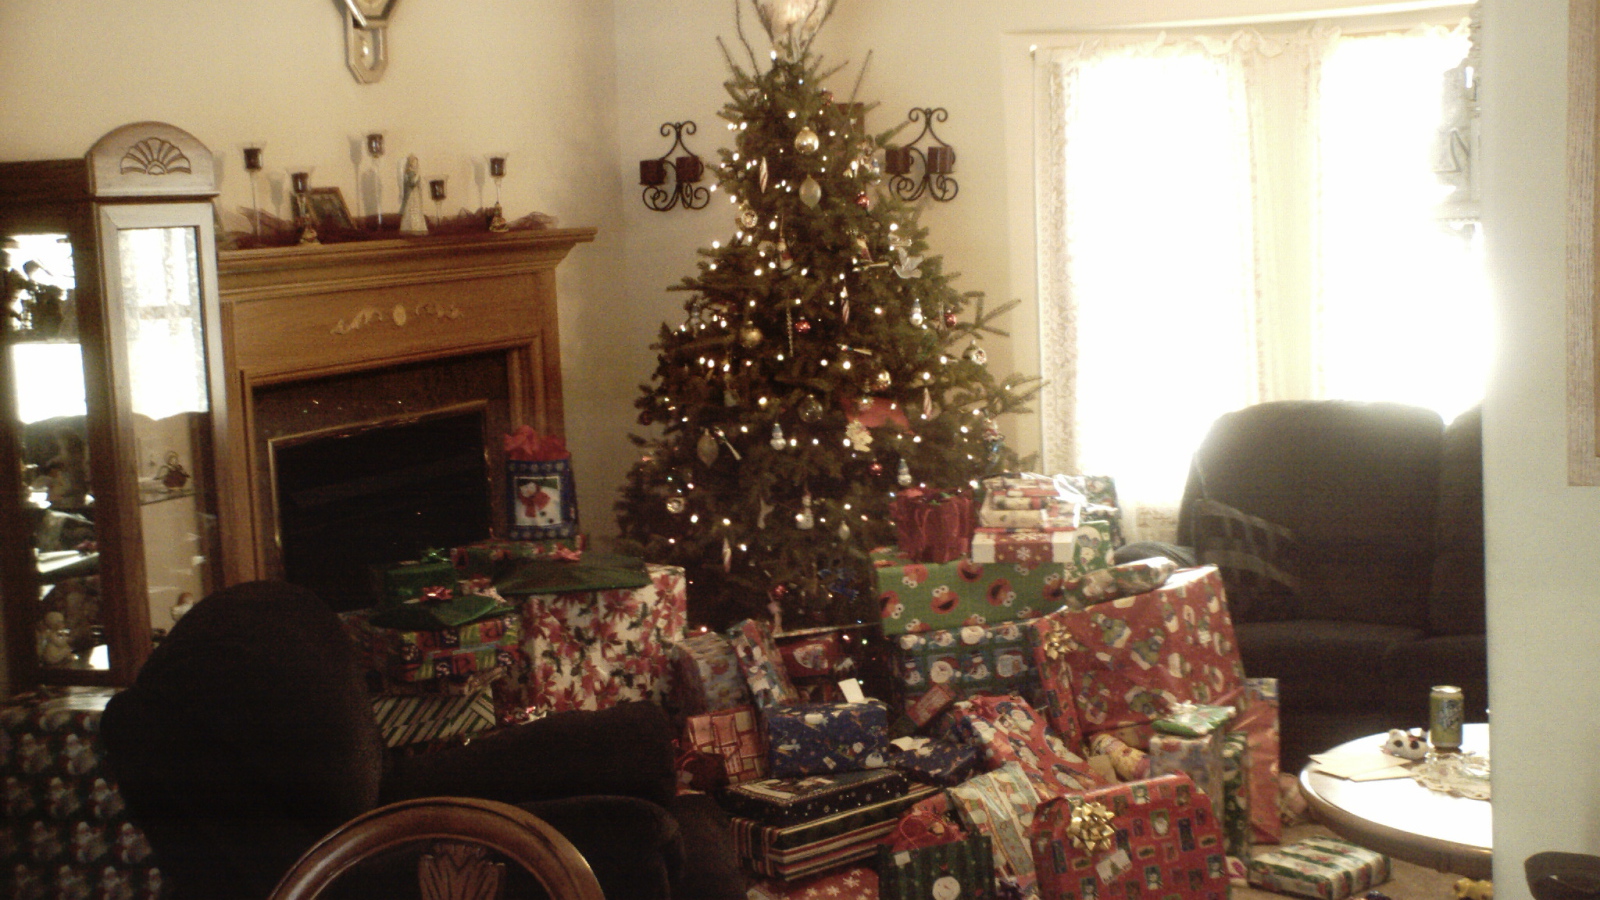 A lot of gifts under New Year tree